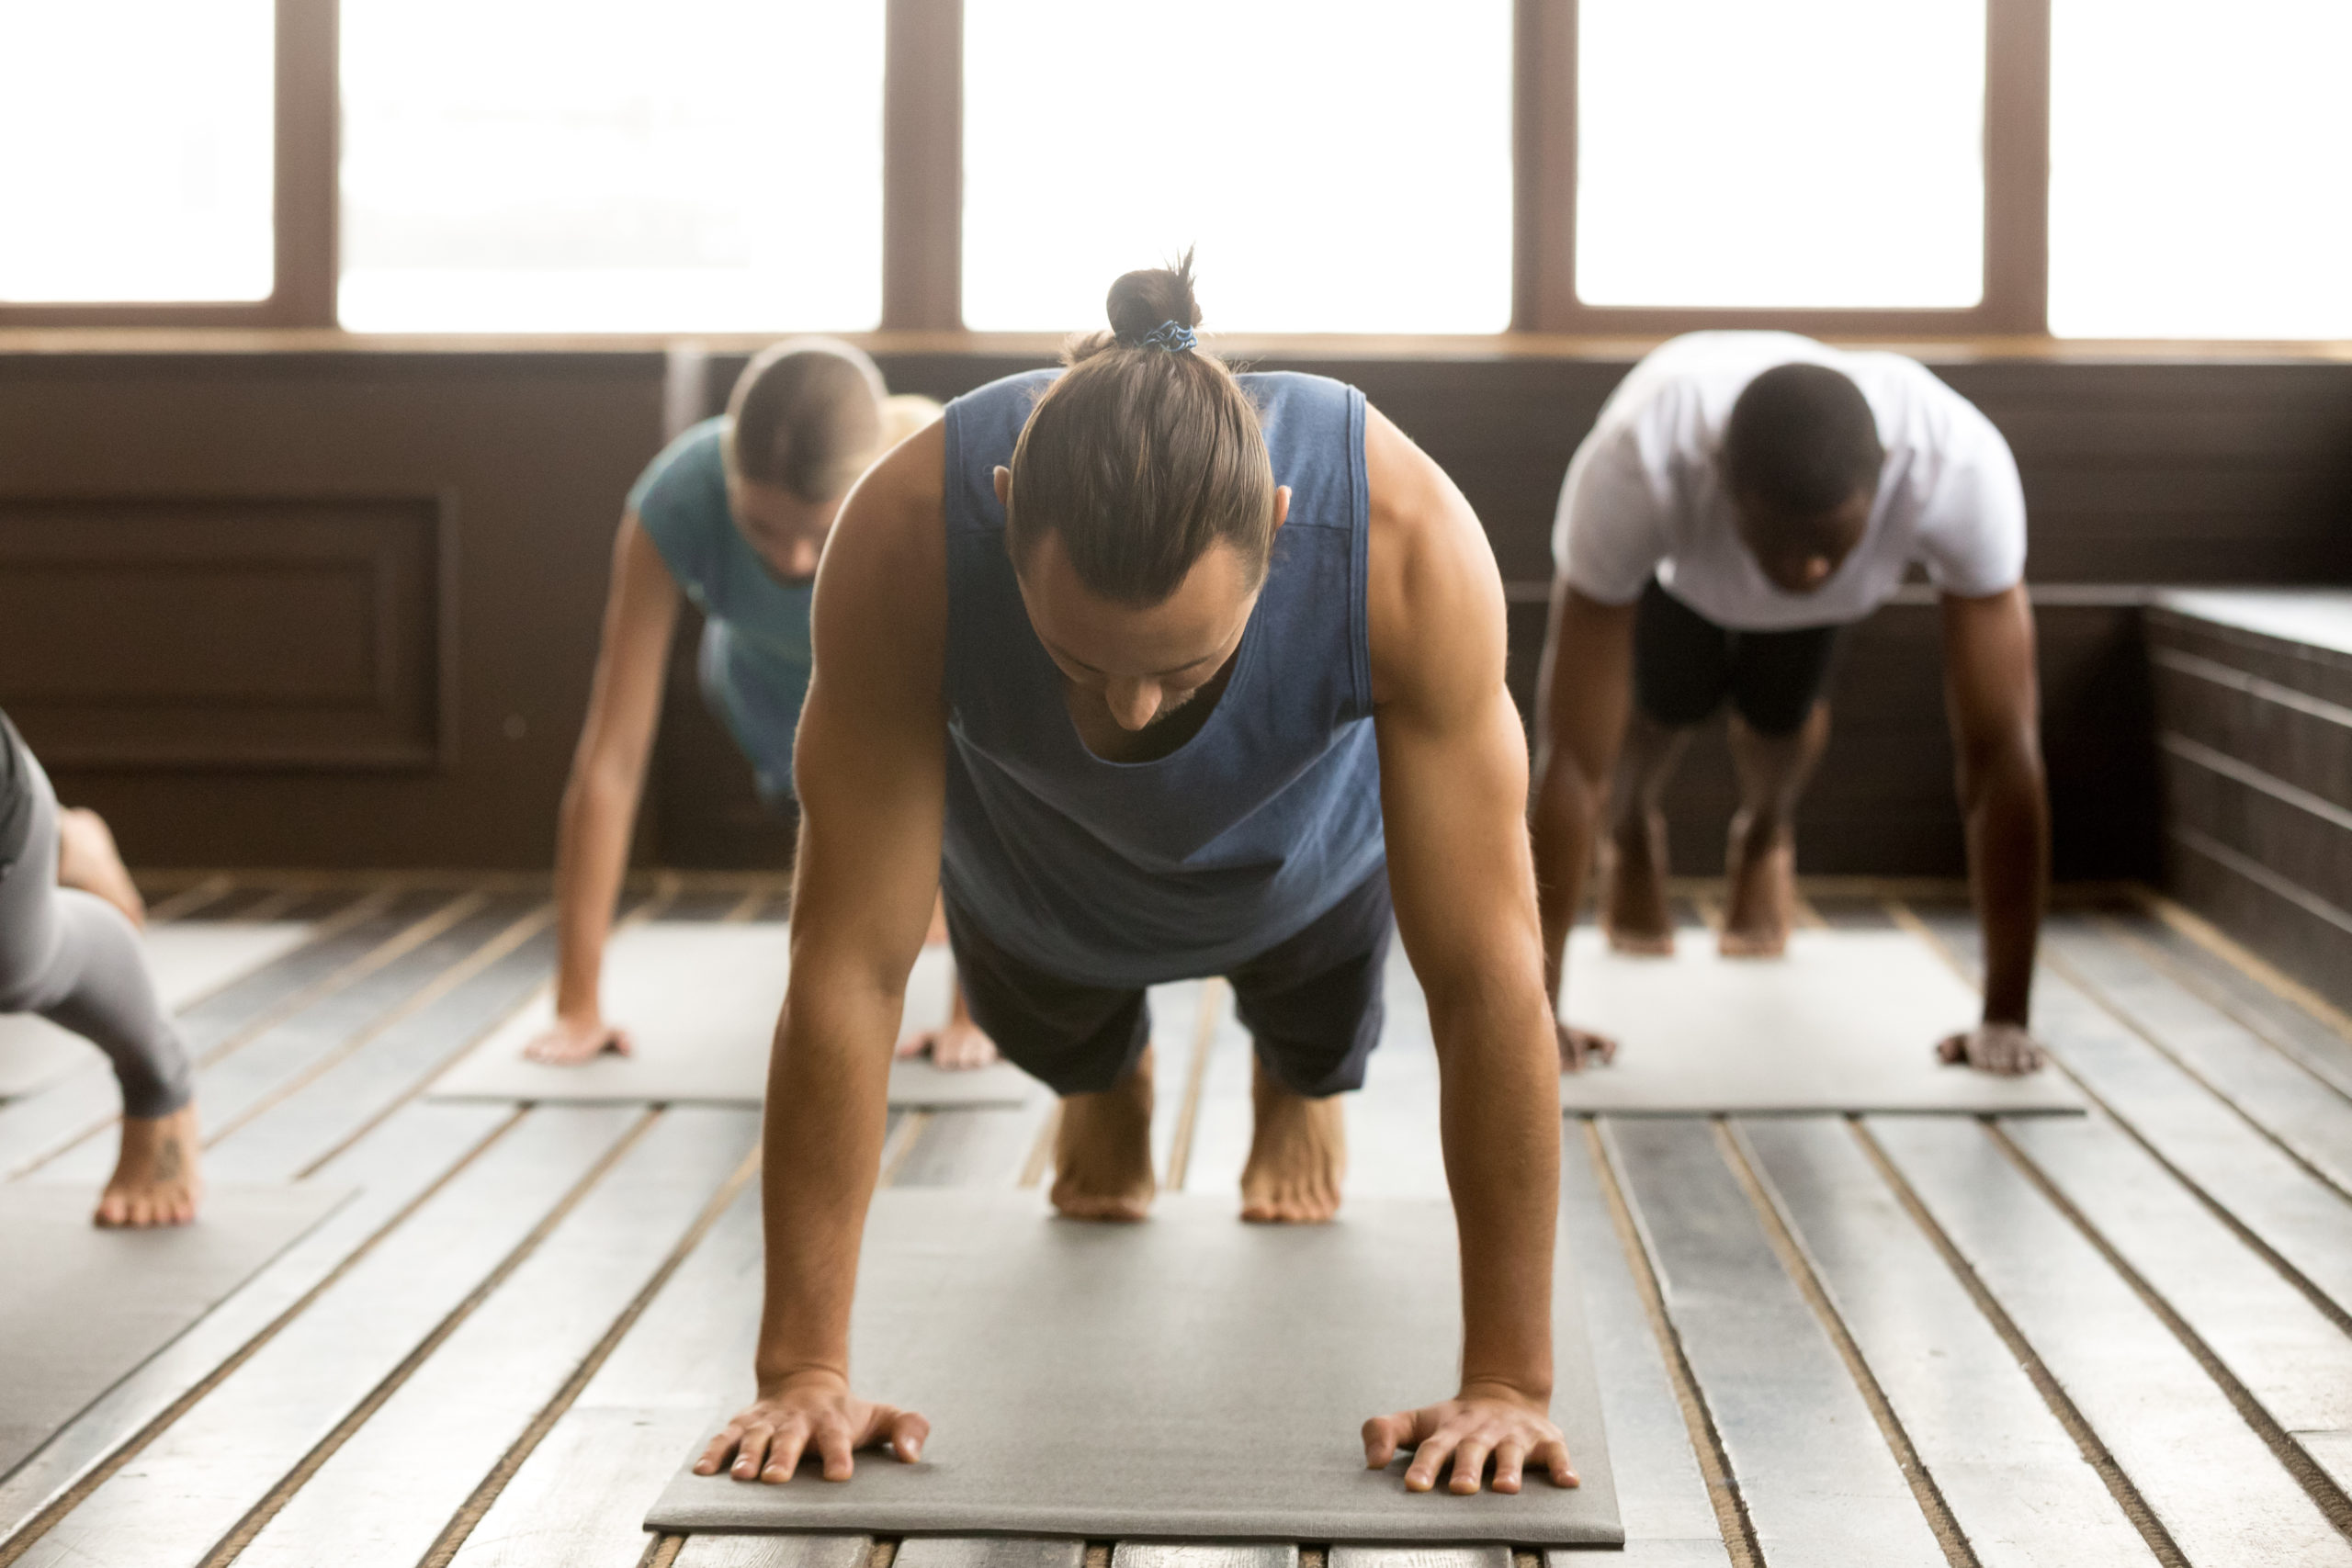 What Clothes Do Men Wear To Yoga